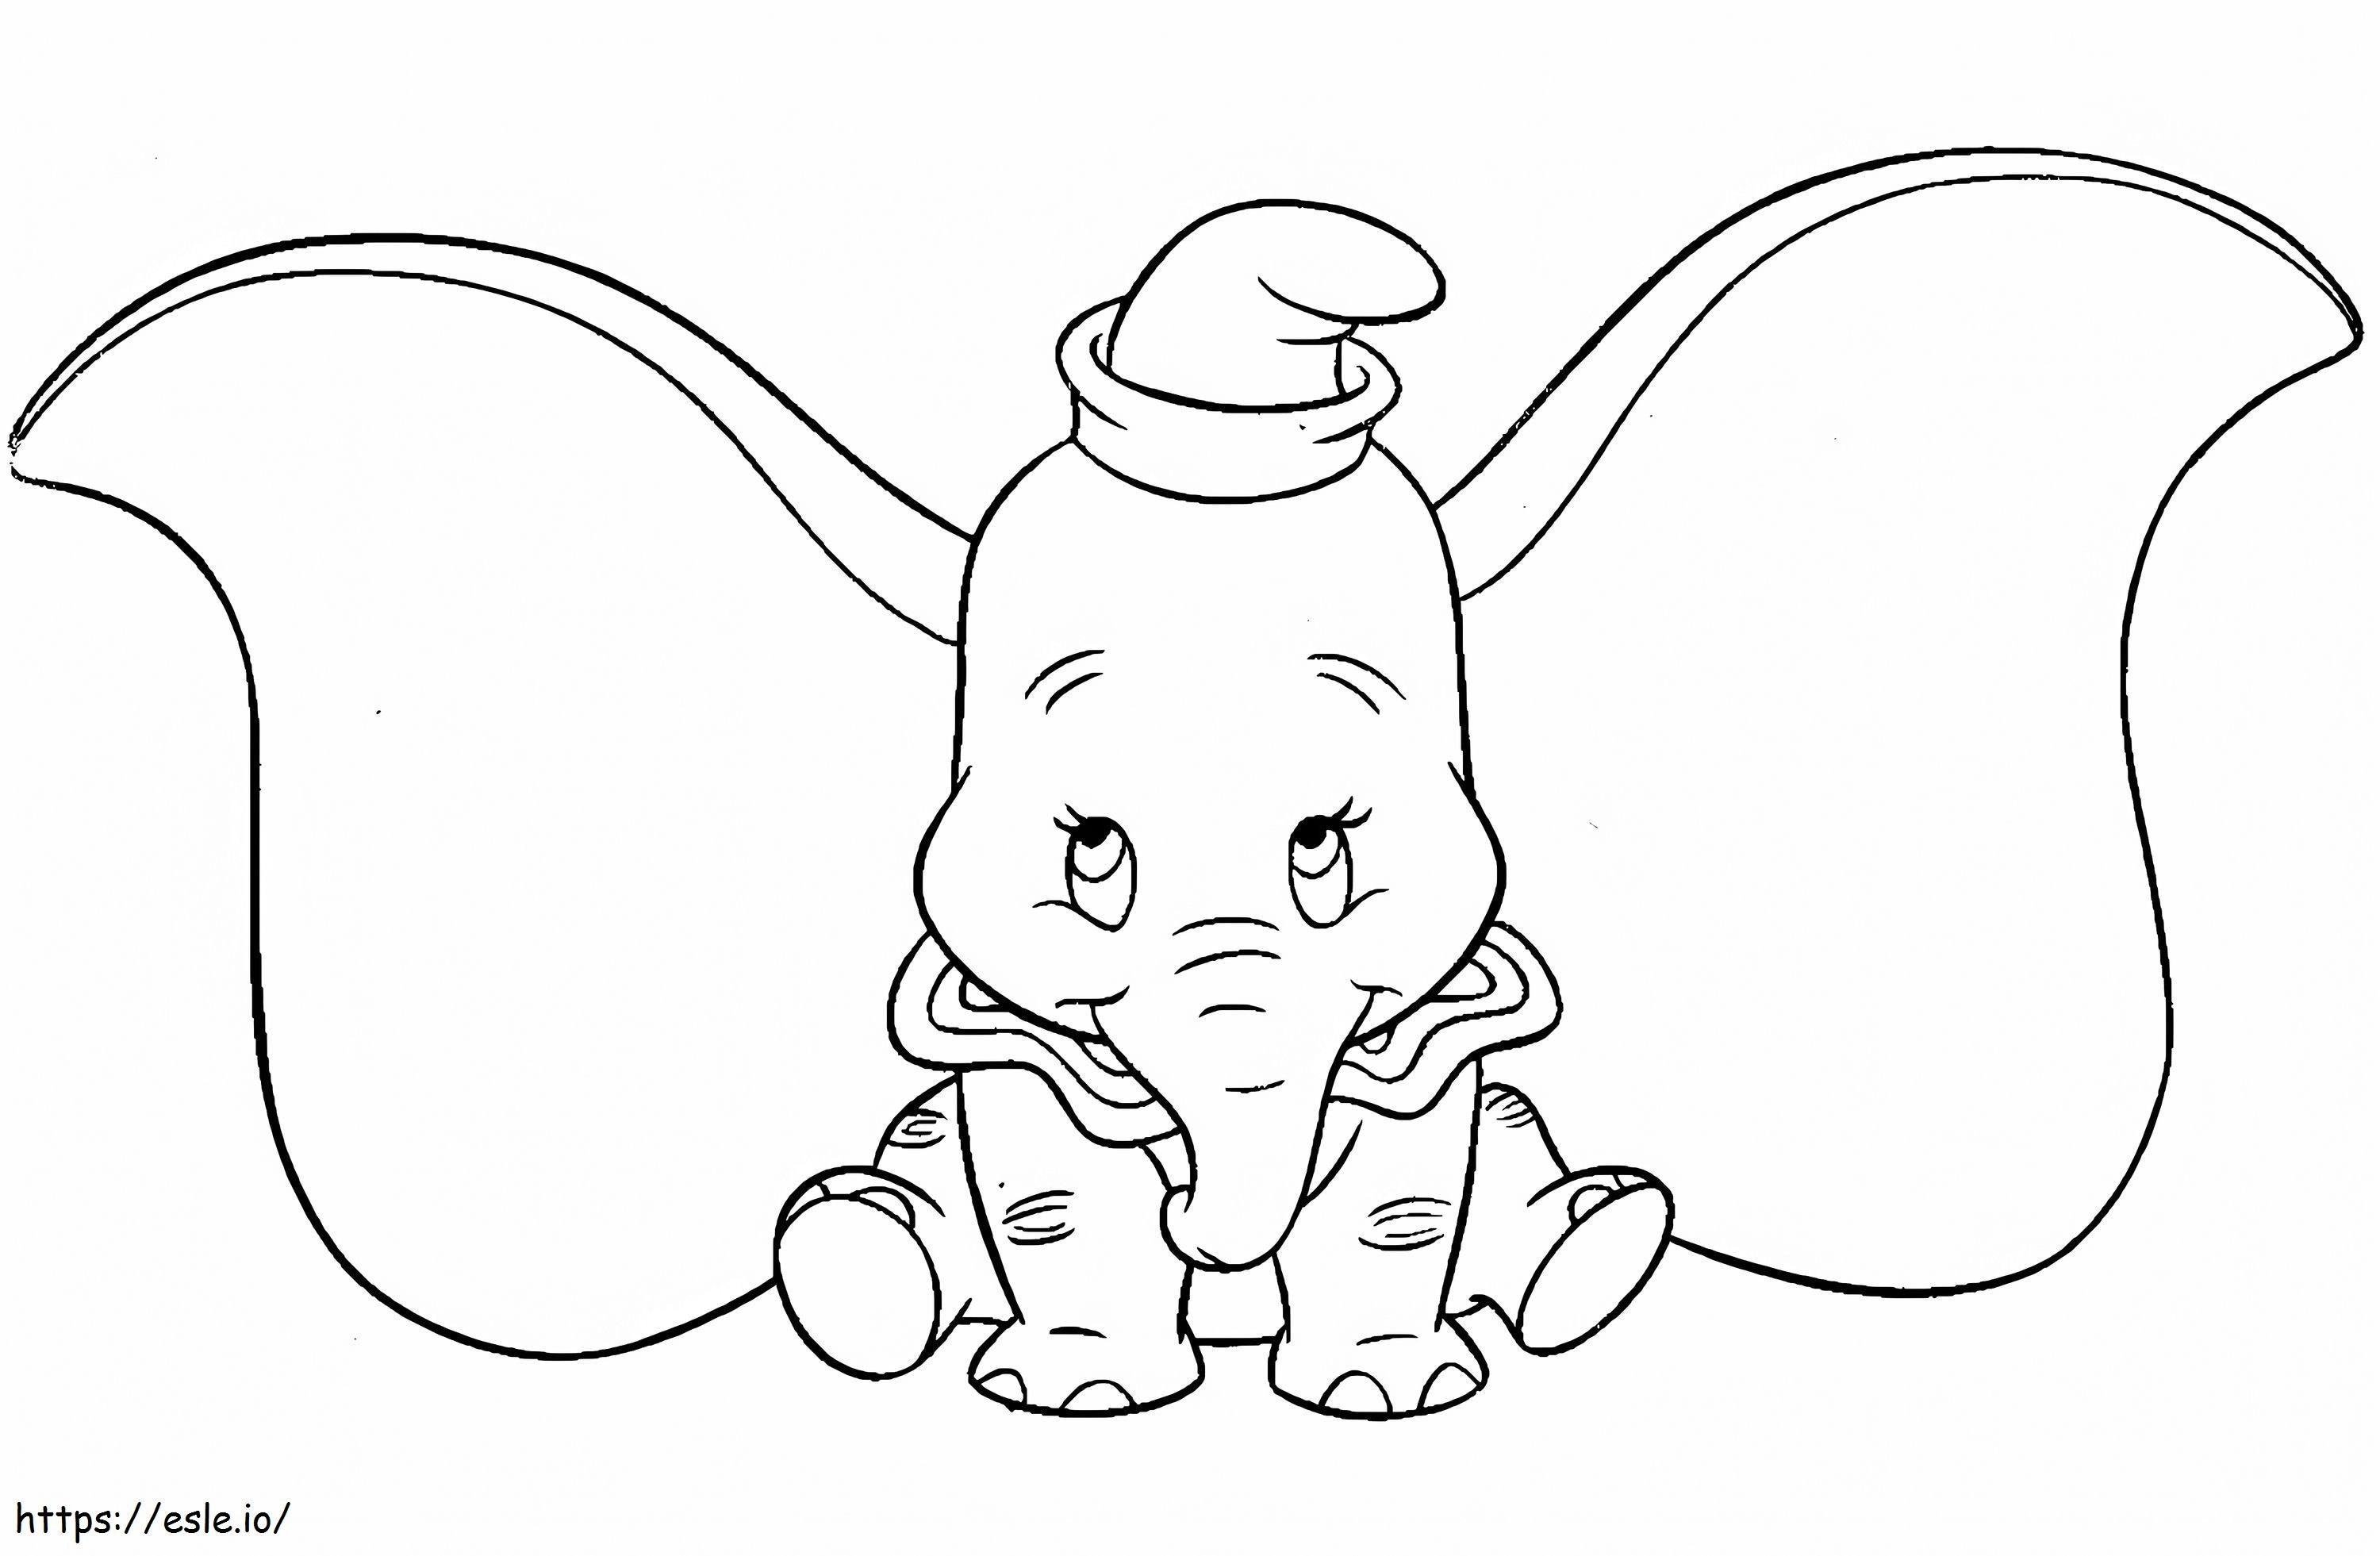 1552695608 Cute Dumbo coloring page